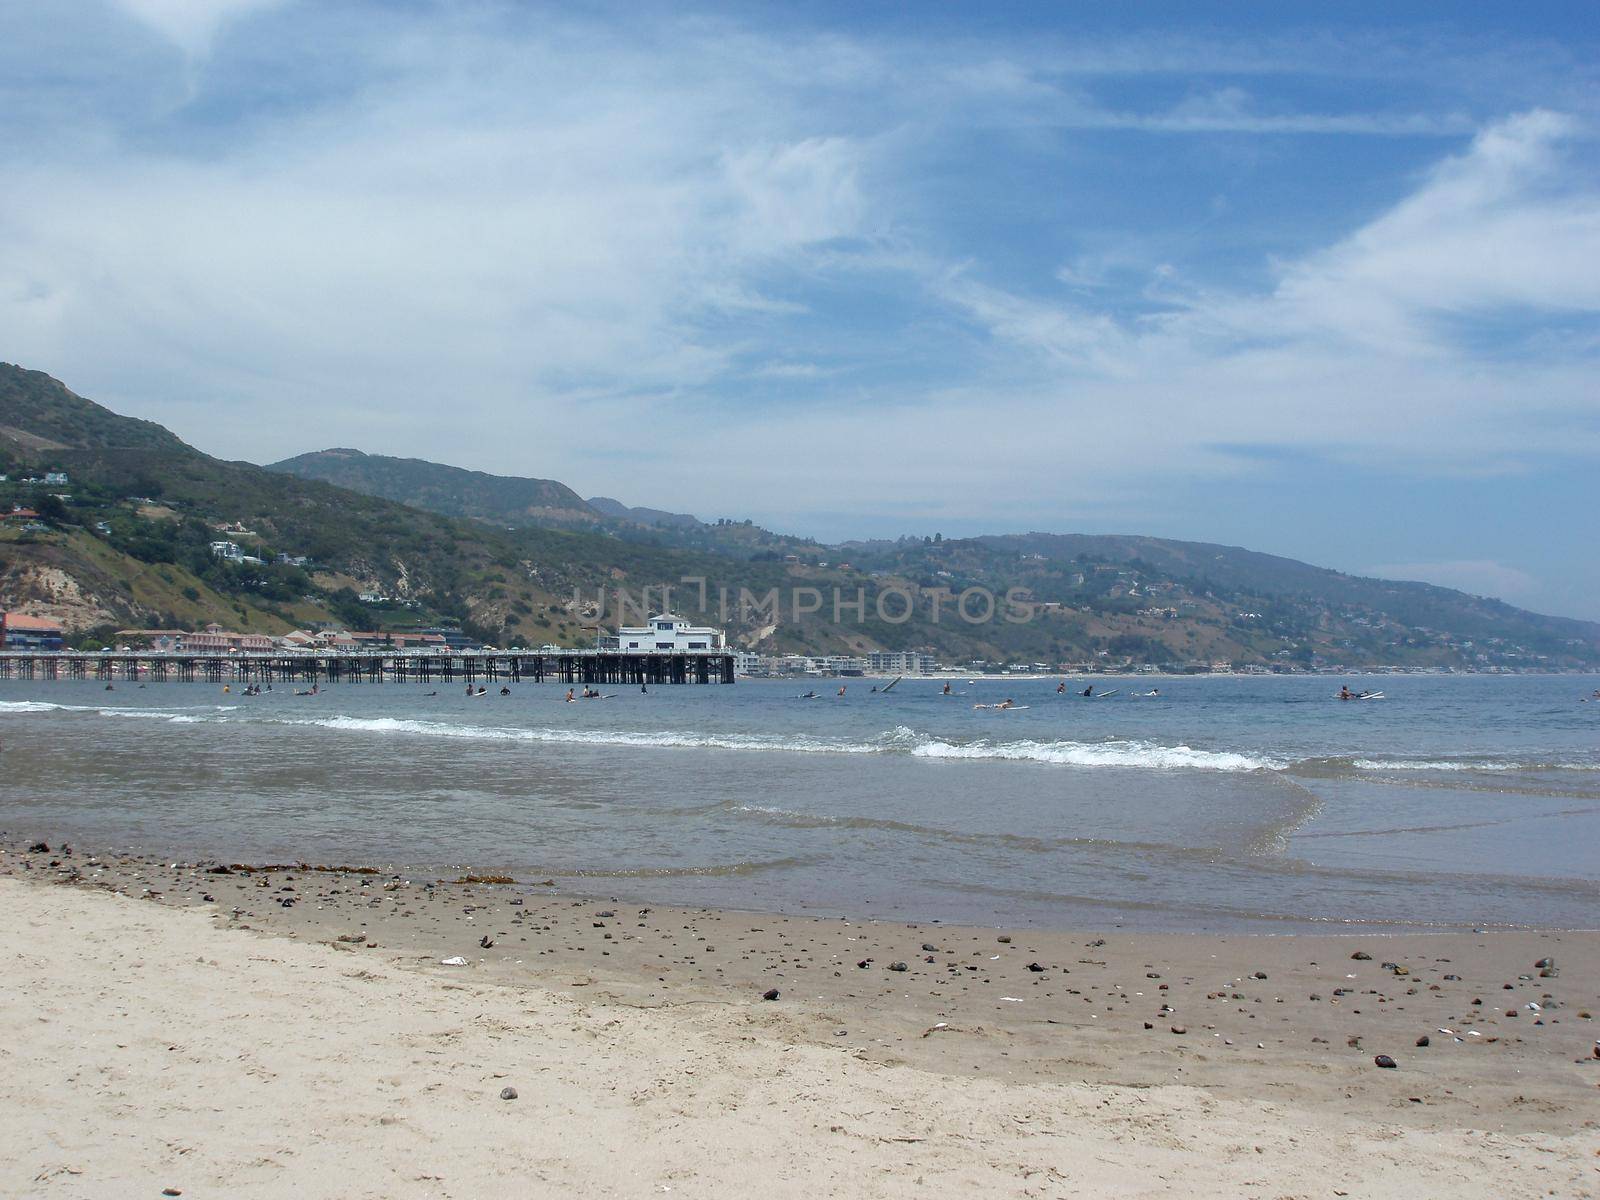 Malibu Lagoon State Beach and Malibu Pier with people surfing in the ocean.